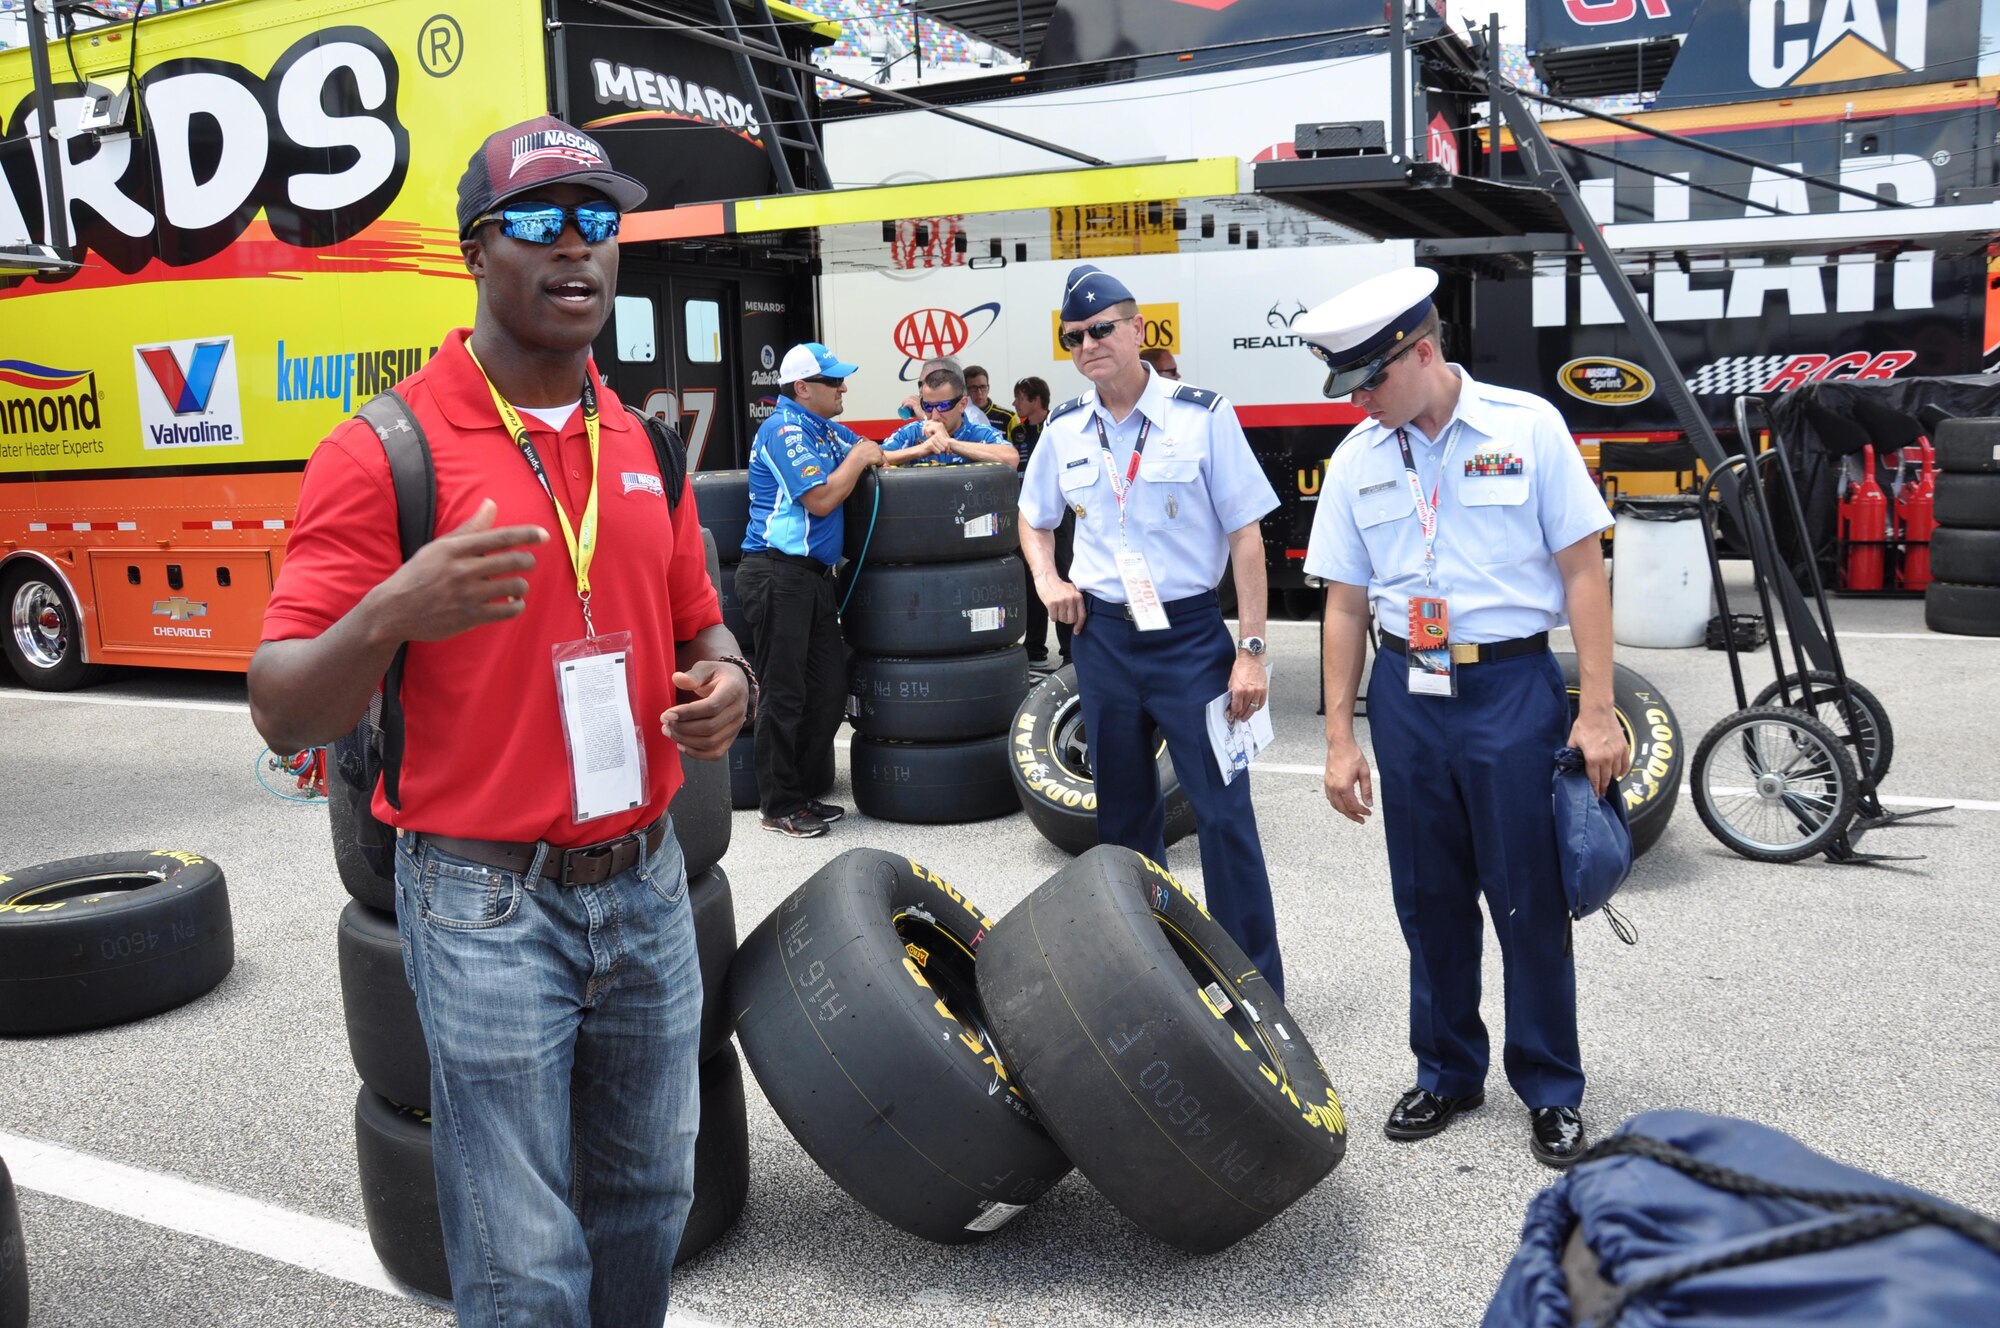 NASCAR K&N Pro Series driver and U.S. Navy Lt. Jesse Iwuji describes the science behind the different substances used in NASCAR tires at the Daytona International Speedway July 1, 2016. Members of the 45th Space Wing and other military units toured Sprint Series Cup and Xfinity garages before the start of the Subway Firecracker 250 race. (U.S. Air Force photo by 1st Lt. Alicia Premo/Released)